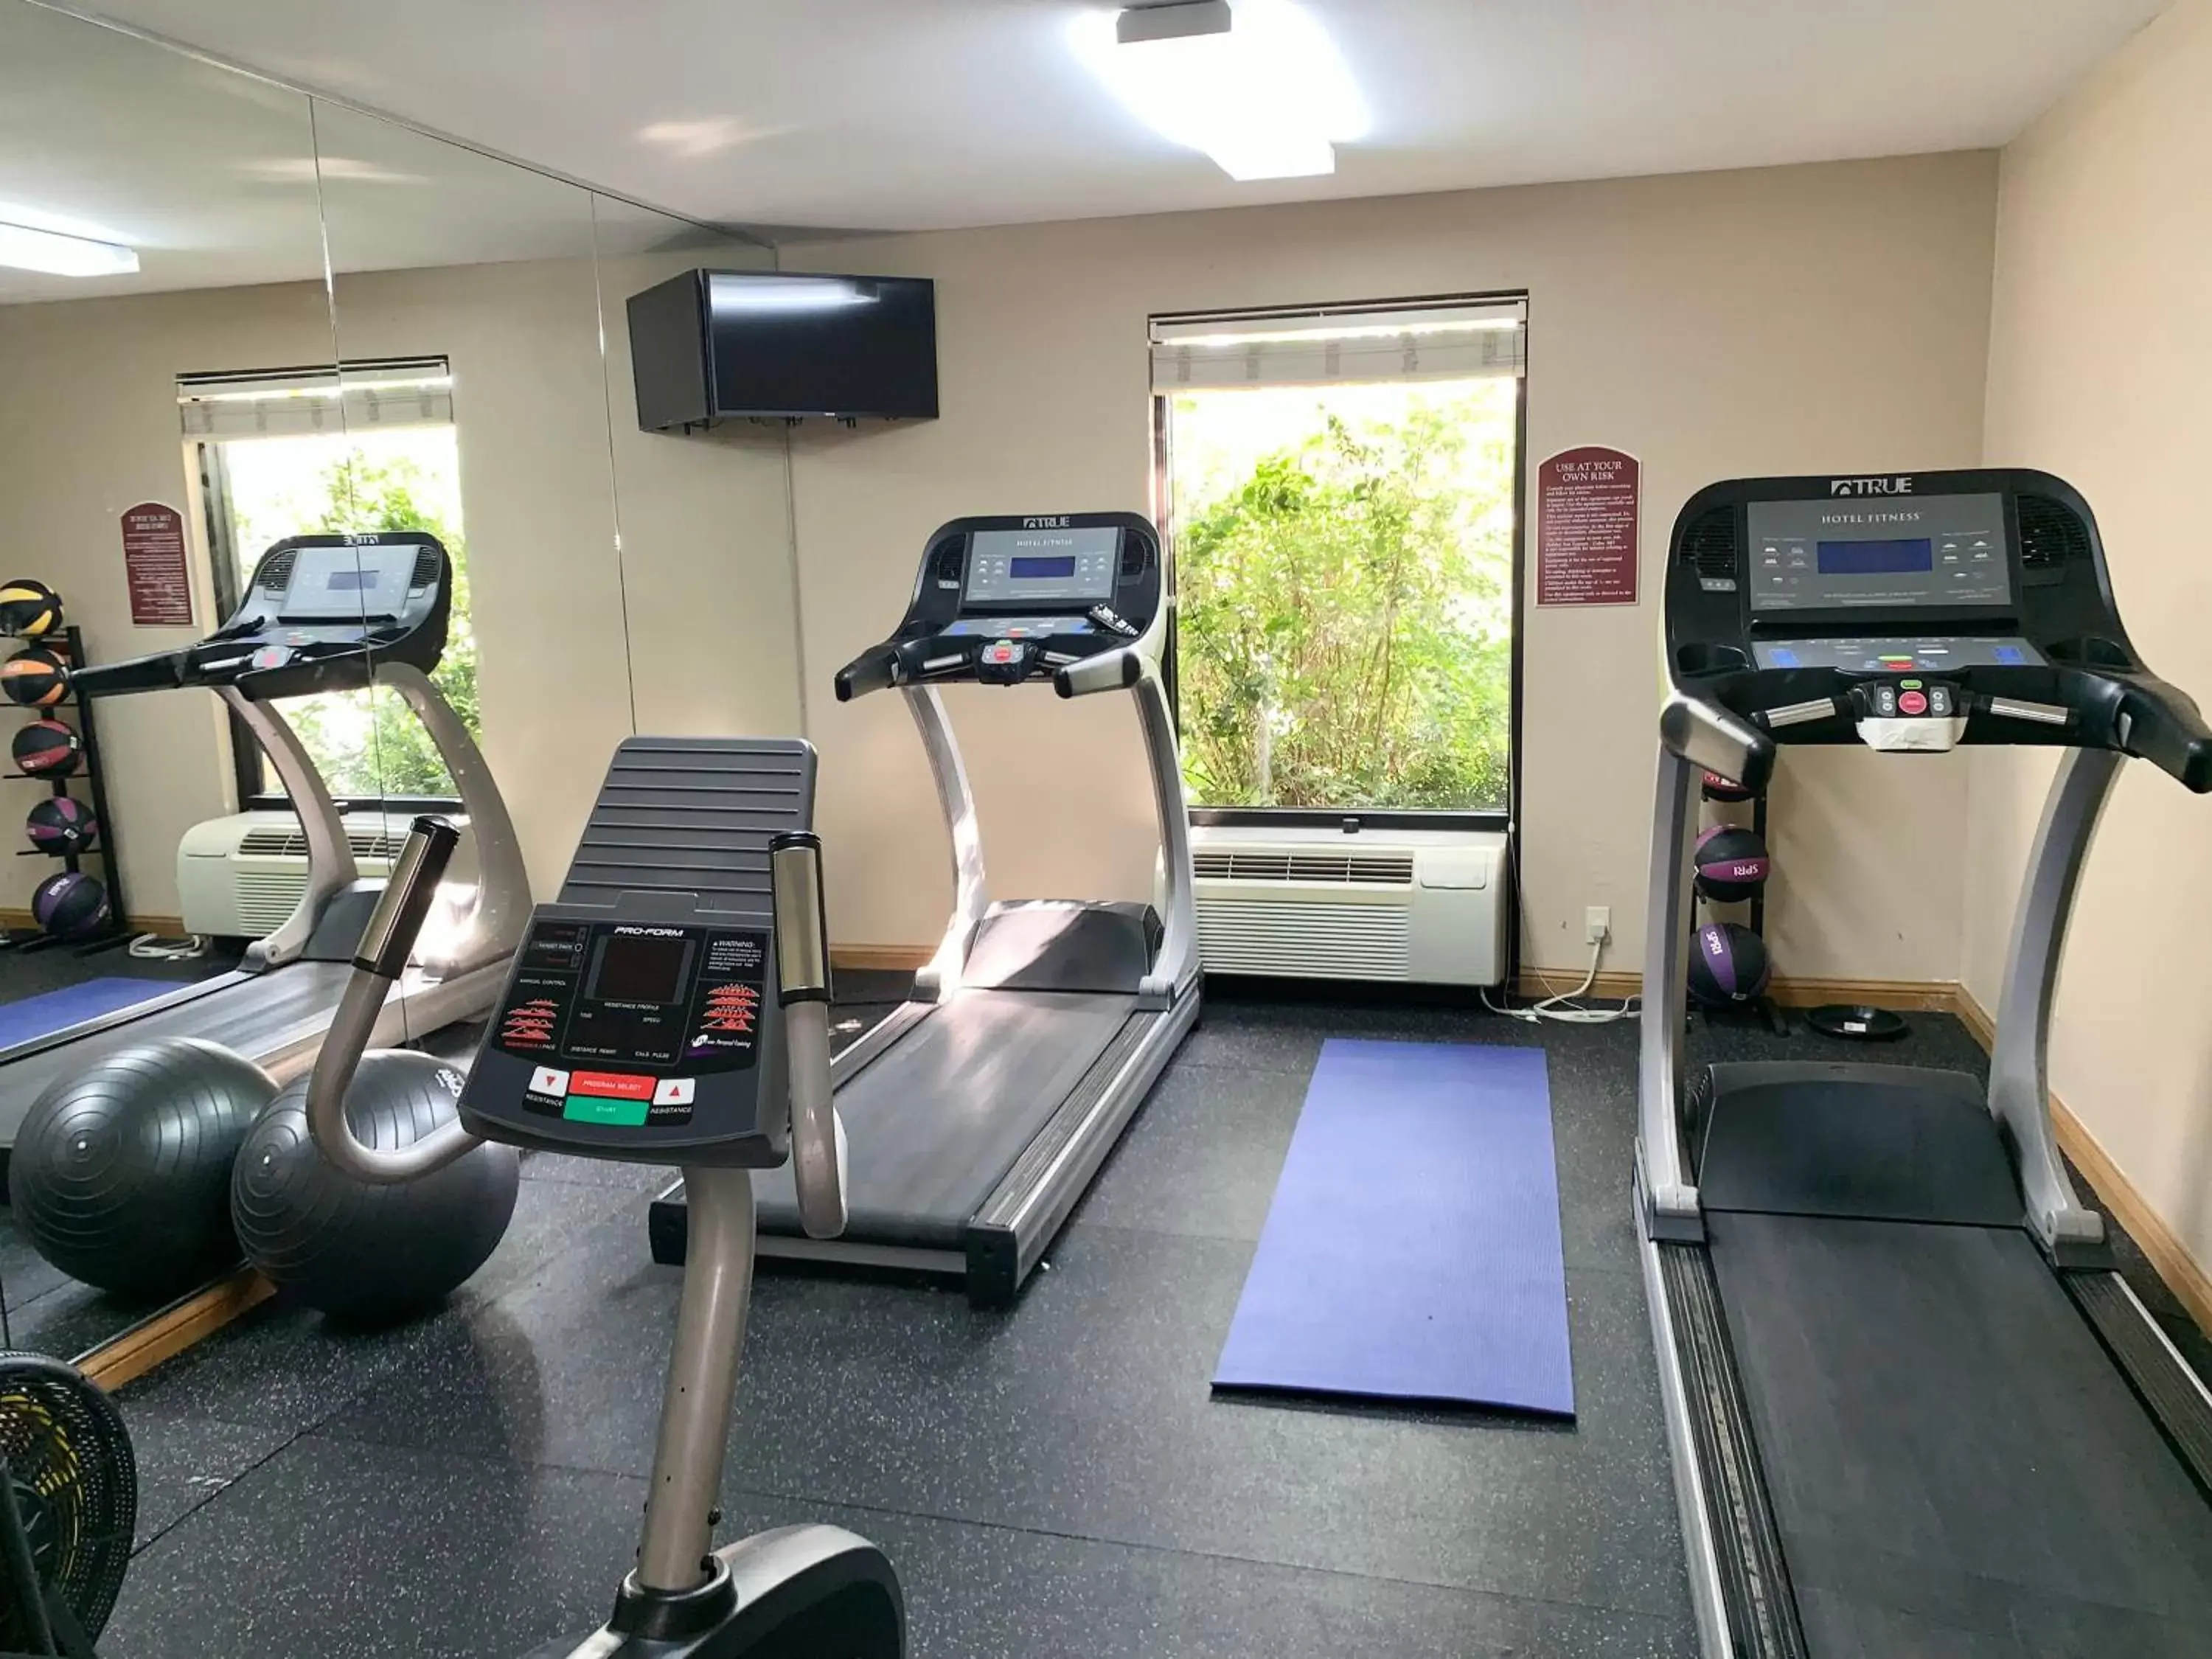 Fitness centre/facilities, Fitness Center/Facilities in Days Inn & Suites by Wyndham Cuba